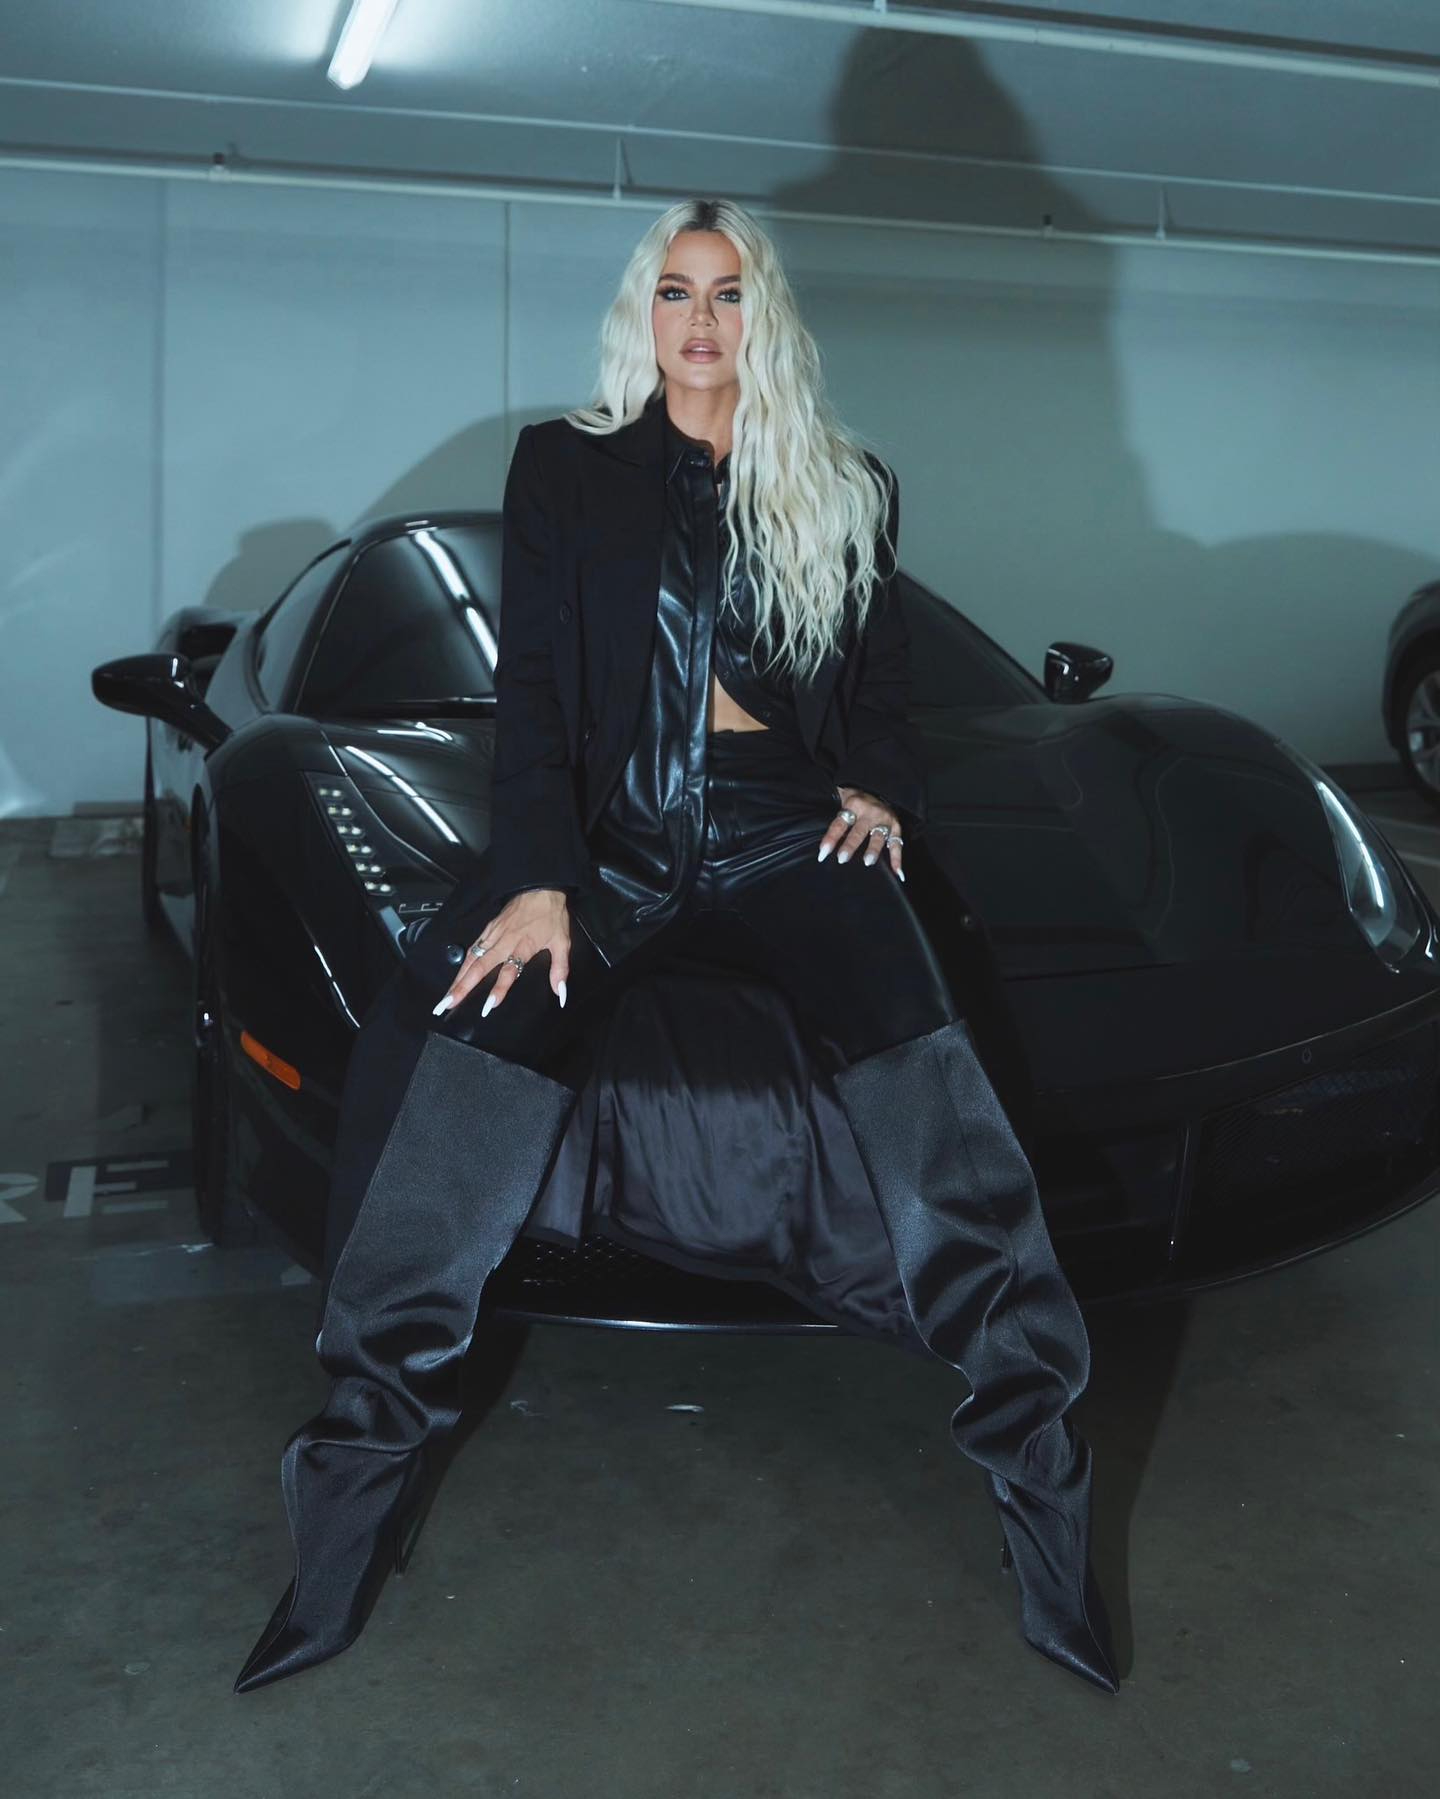 Khloe recently traded bright hues for all-black attire while posing against a black Ferrari